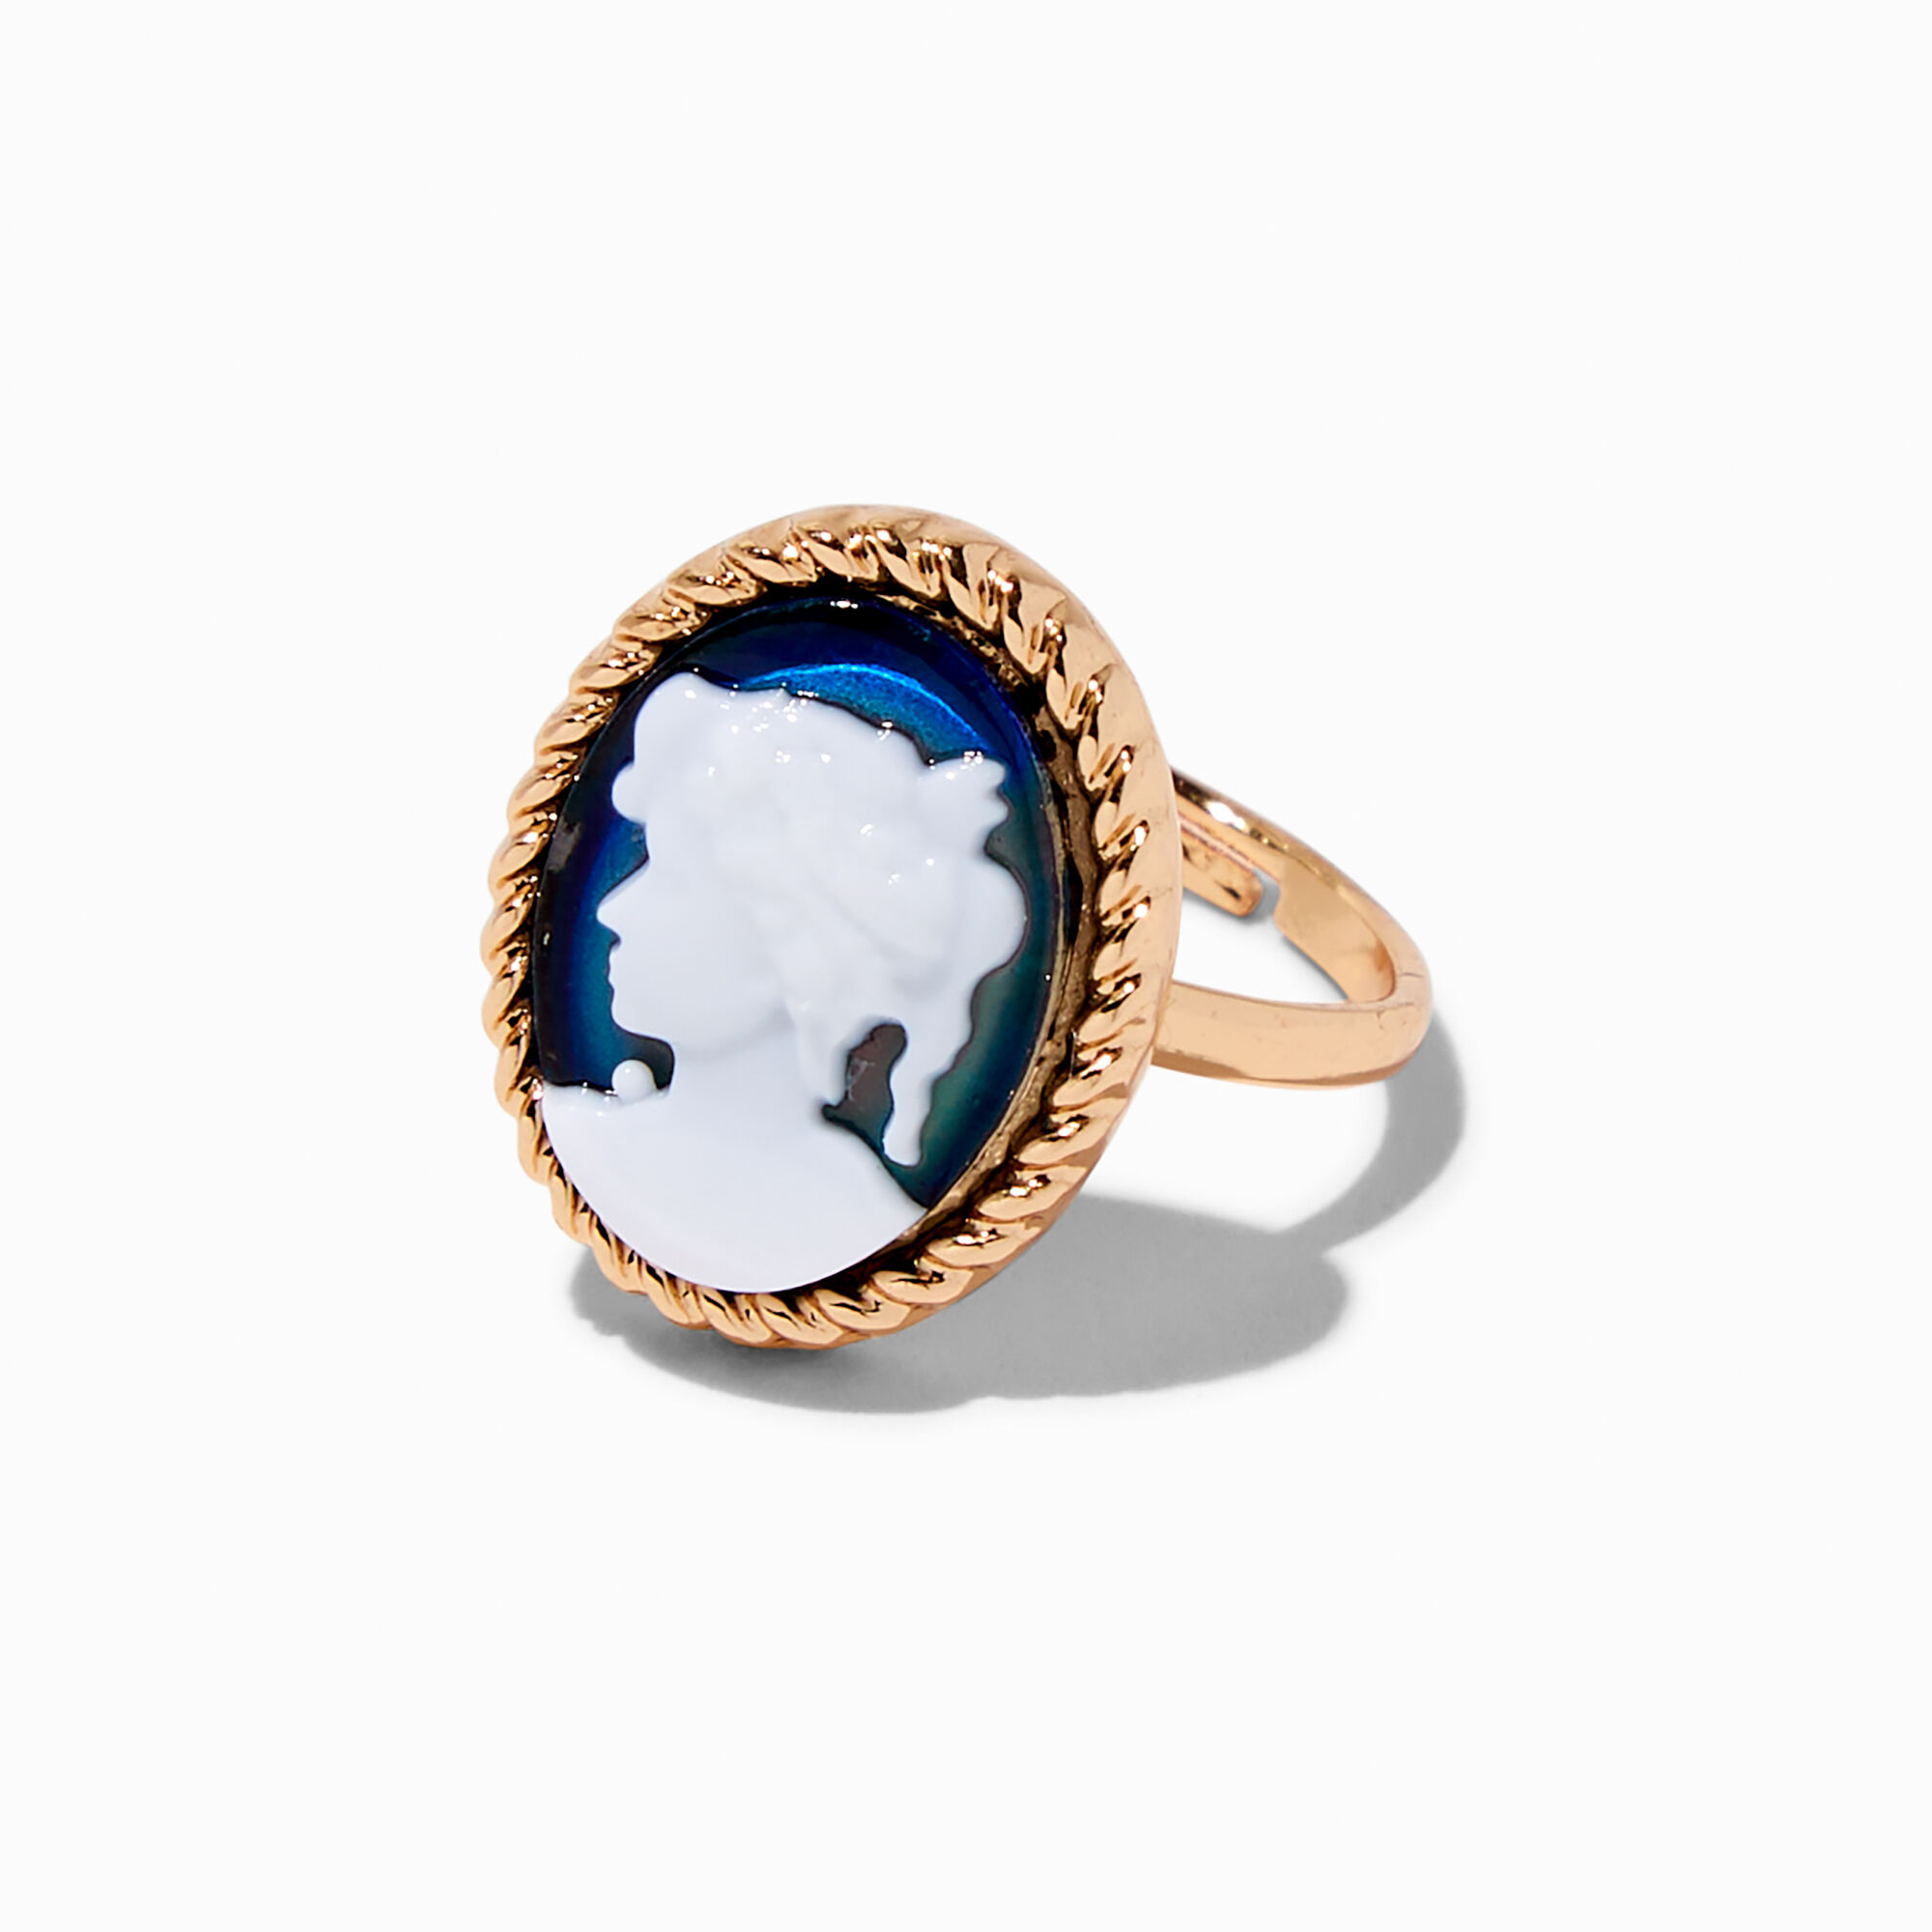 View Claires Tone Cameo Mood Ring Gold information